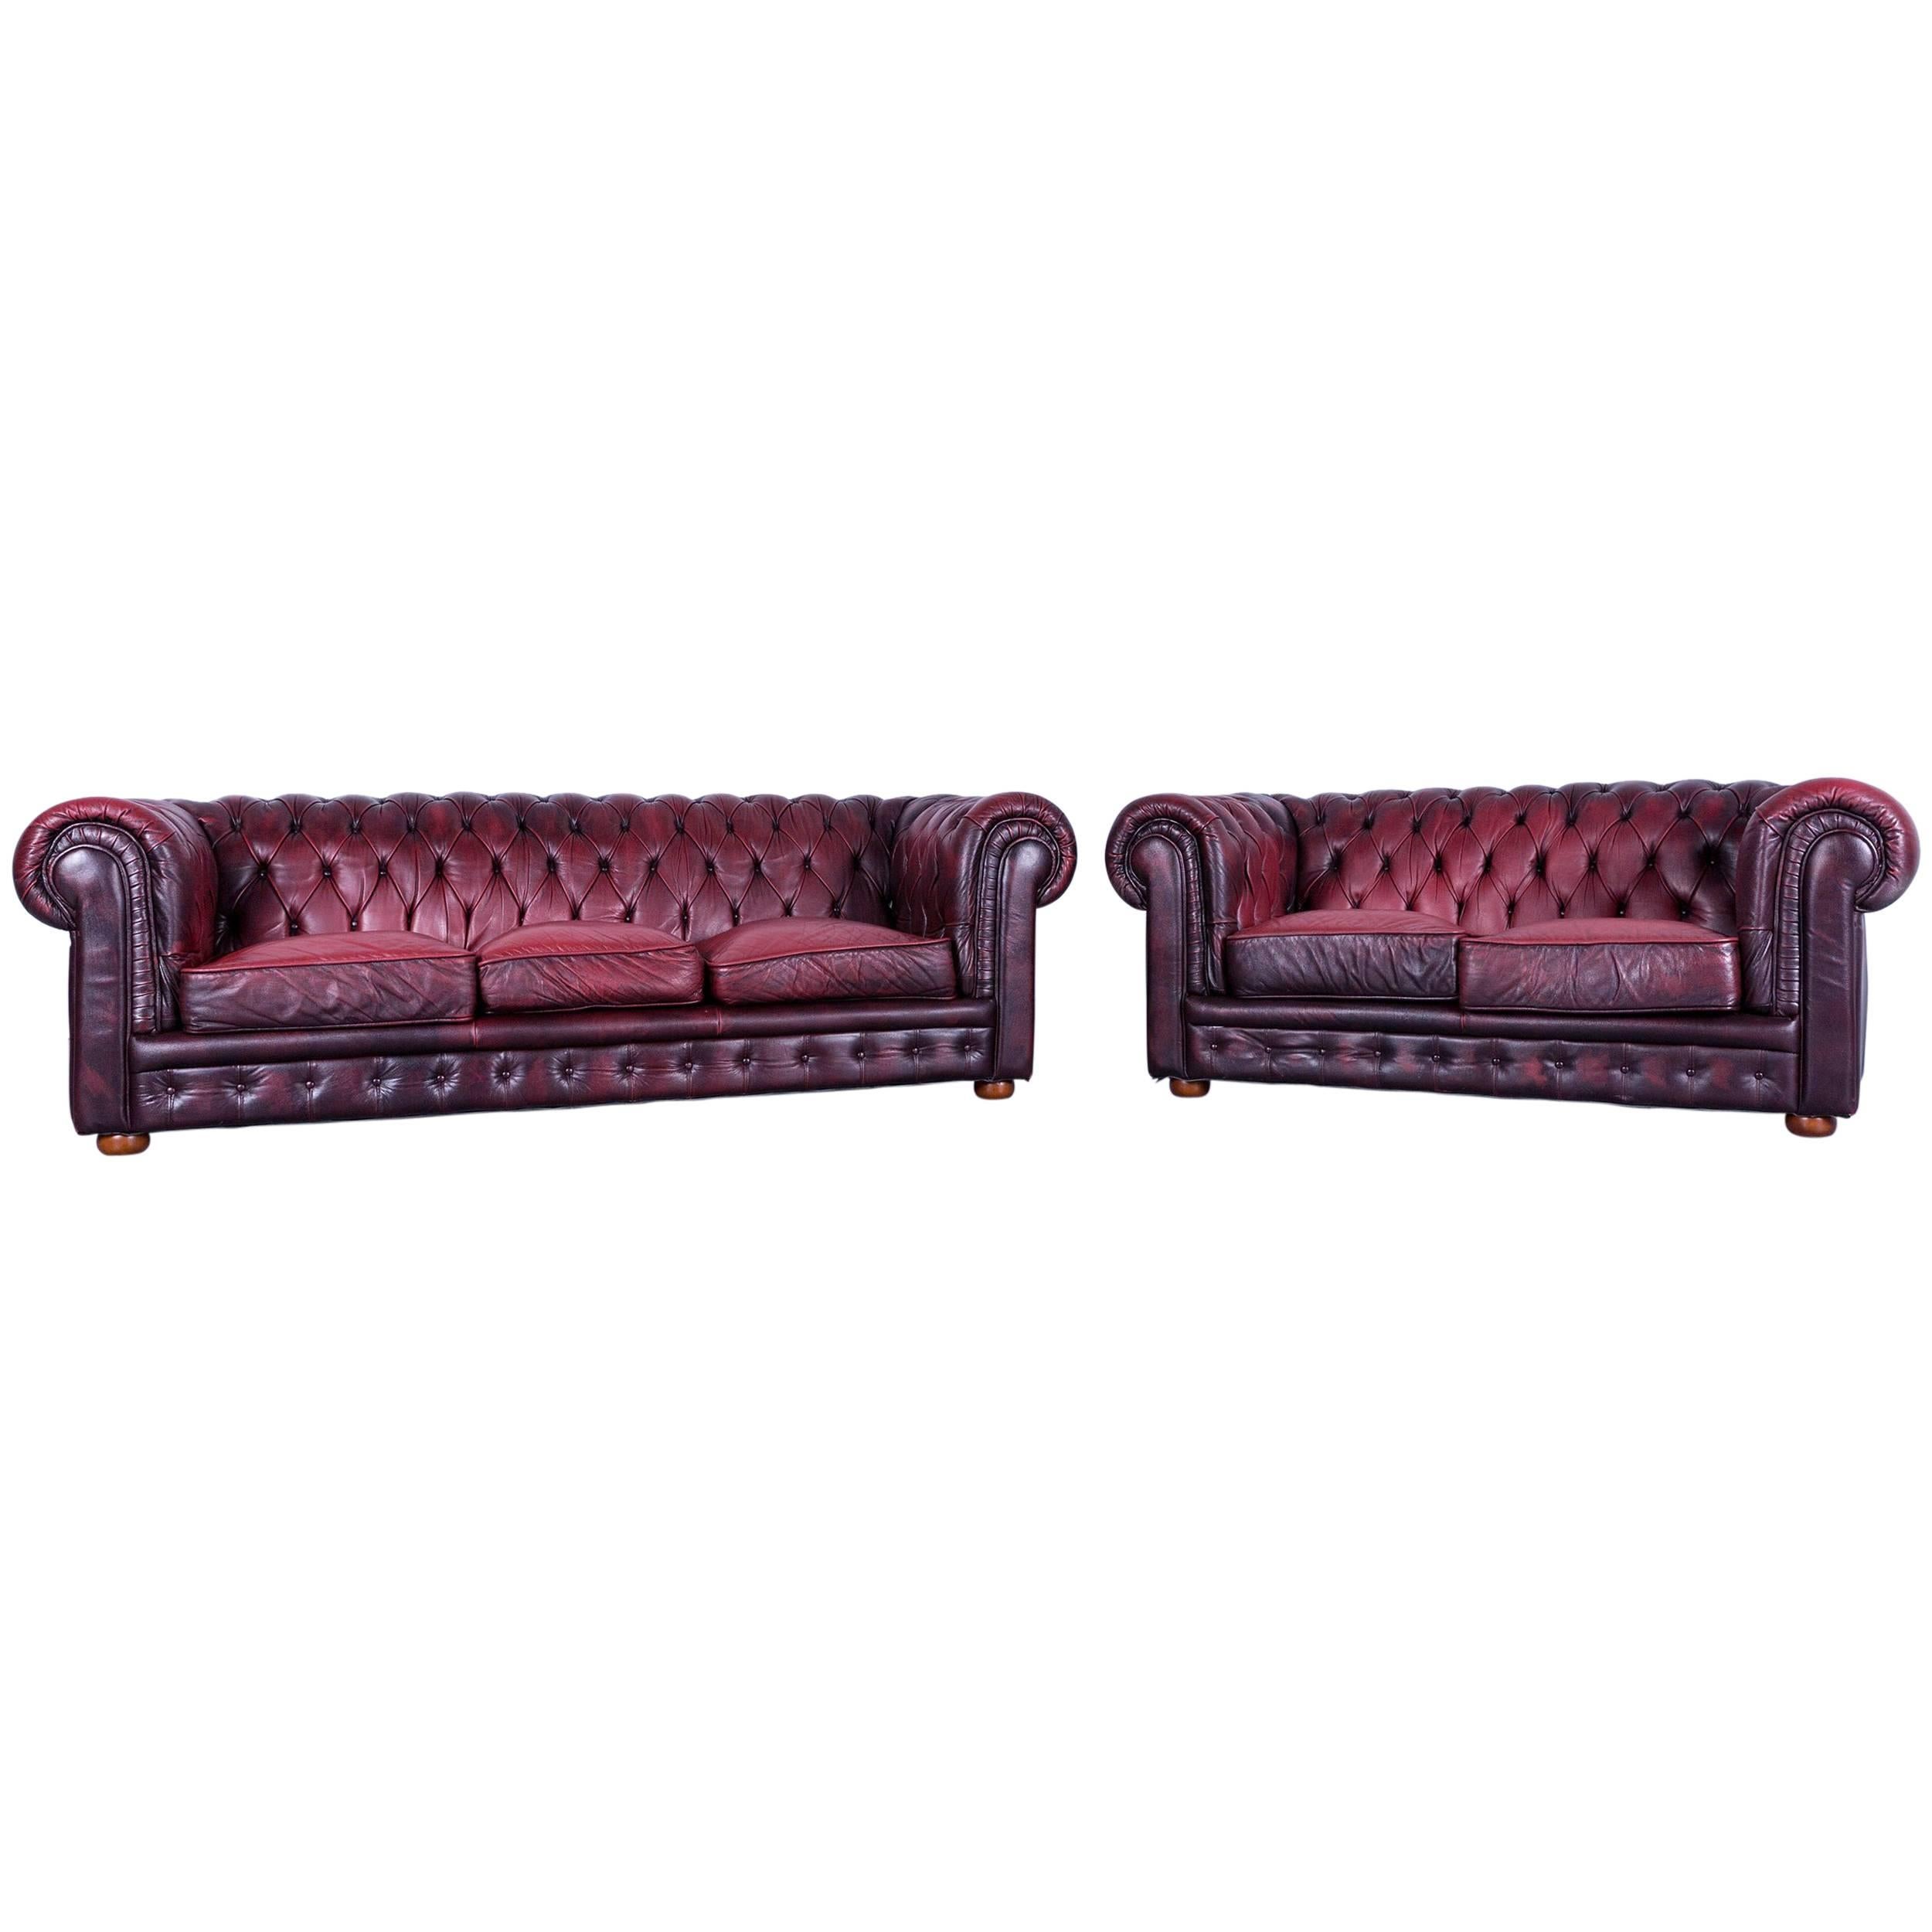 Chesterfield Sofa Set Red Leather Couch Vintage Retro Rivets For Sale